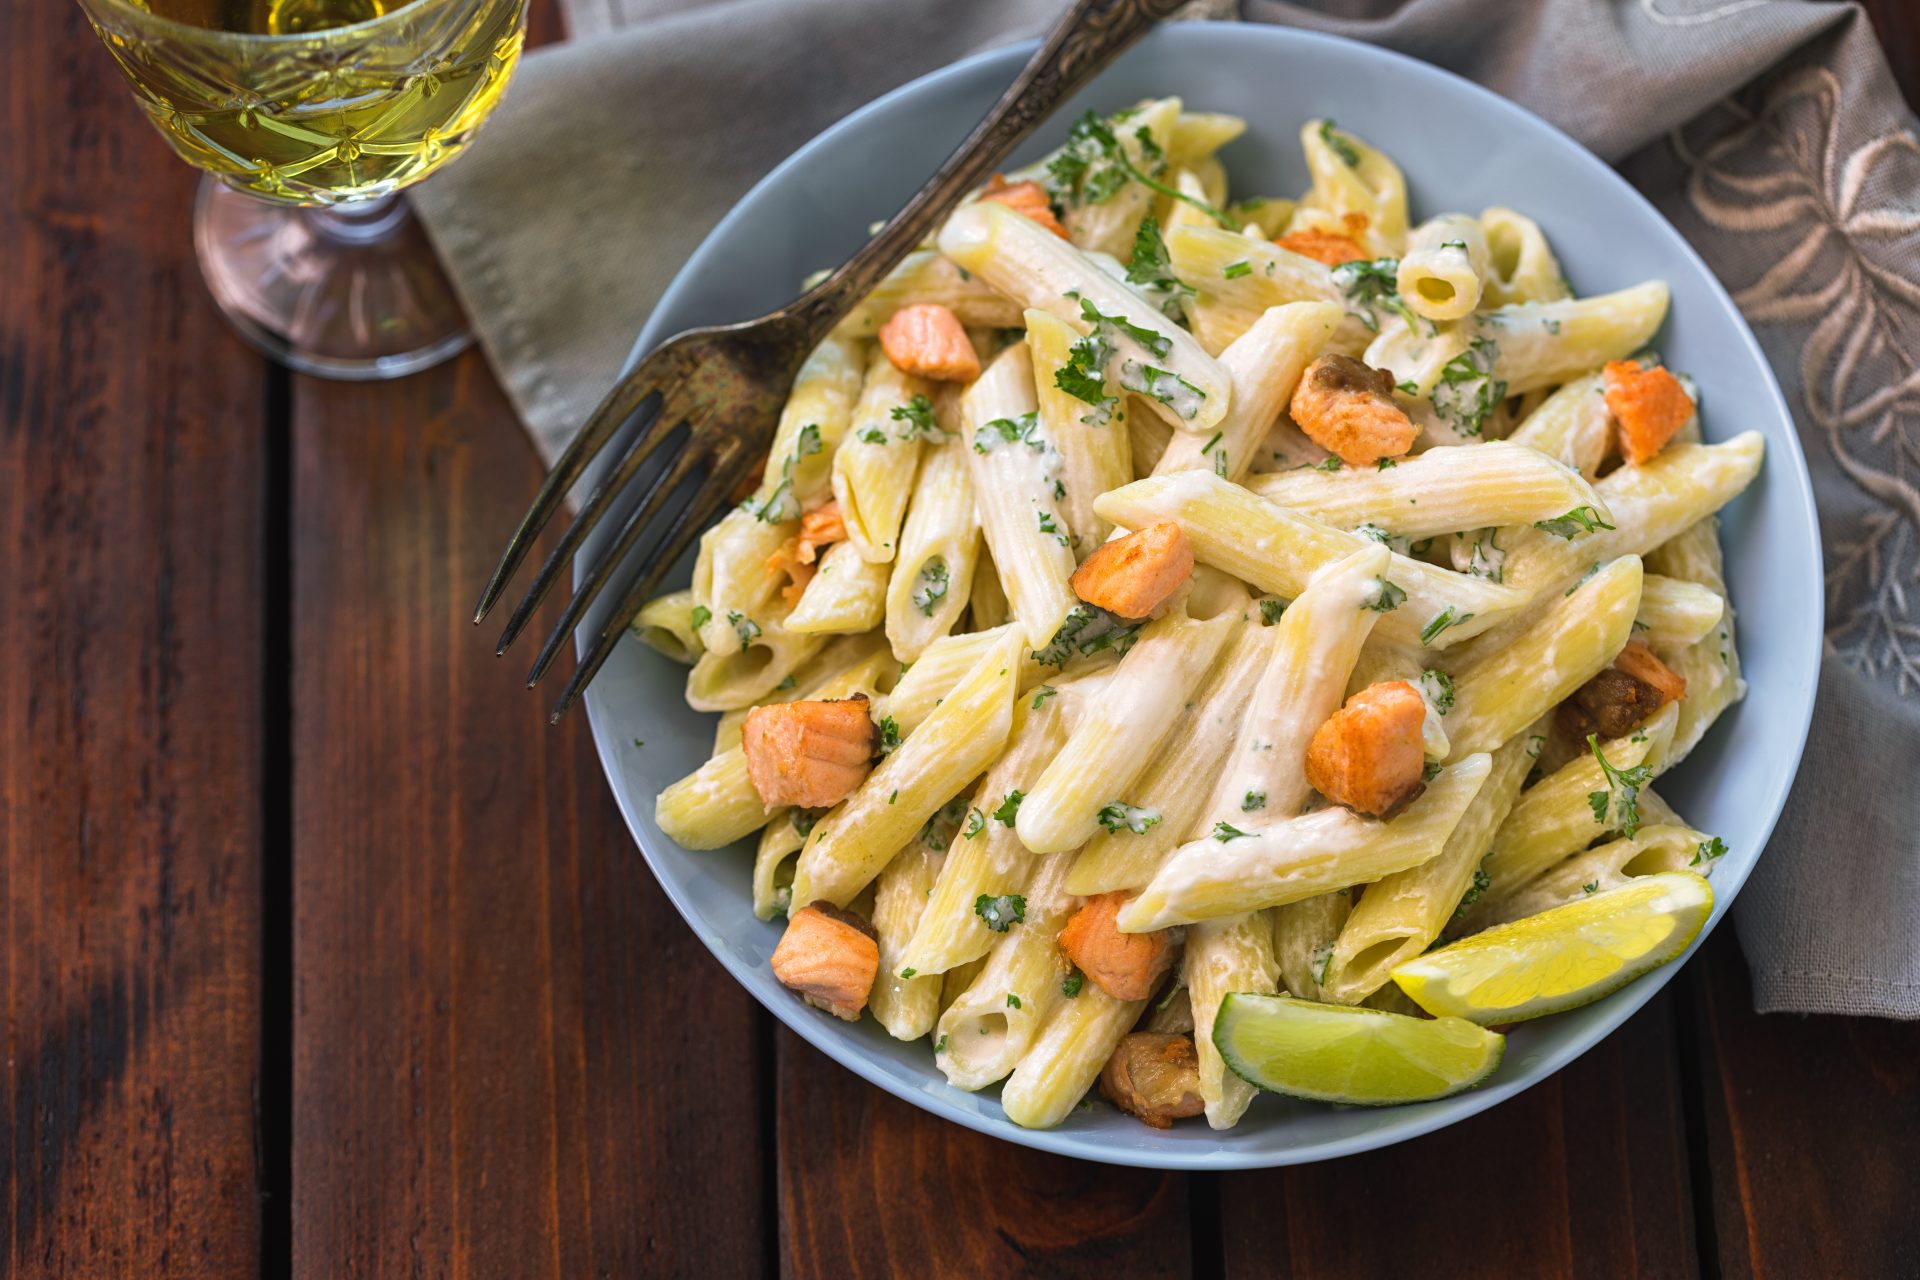 Penne with salmon and herbs